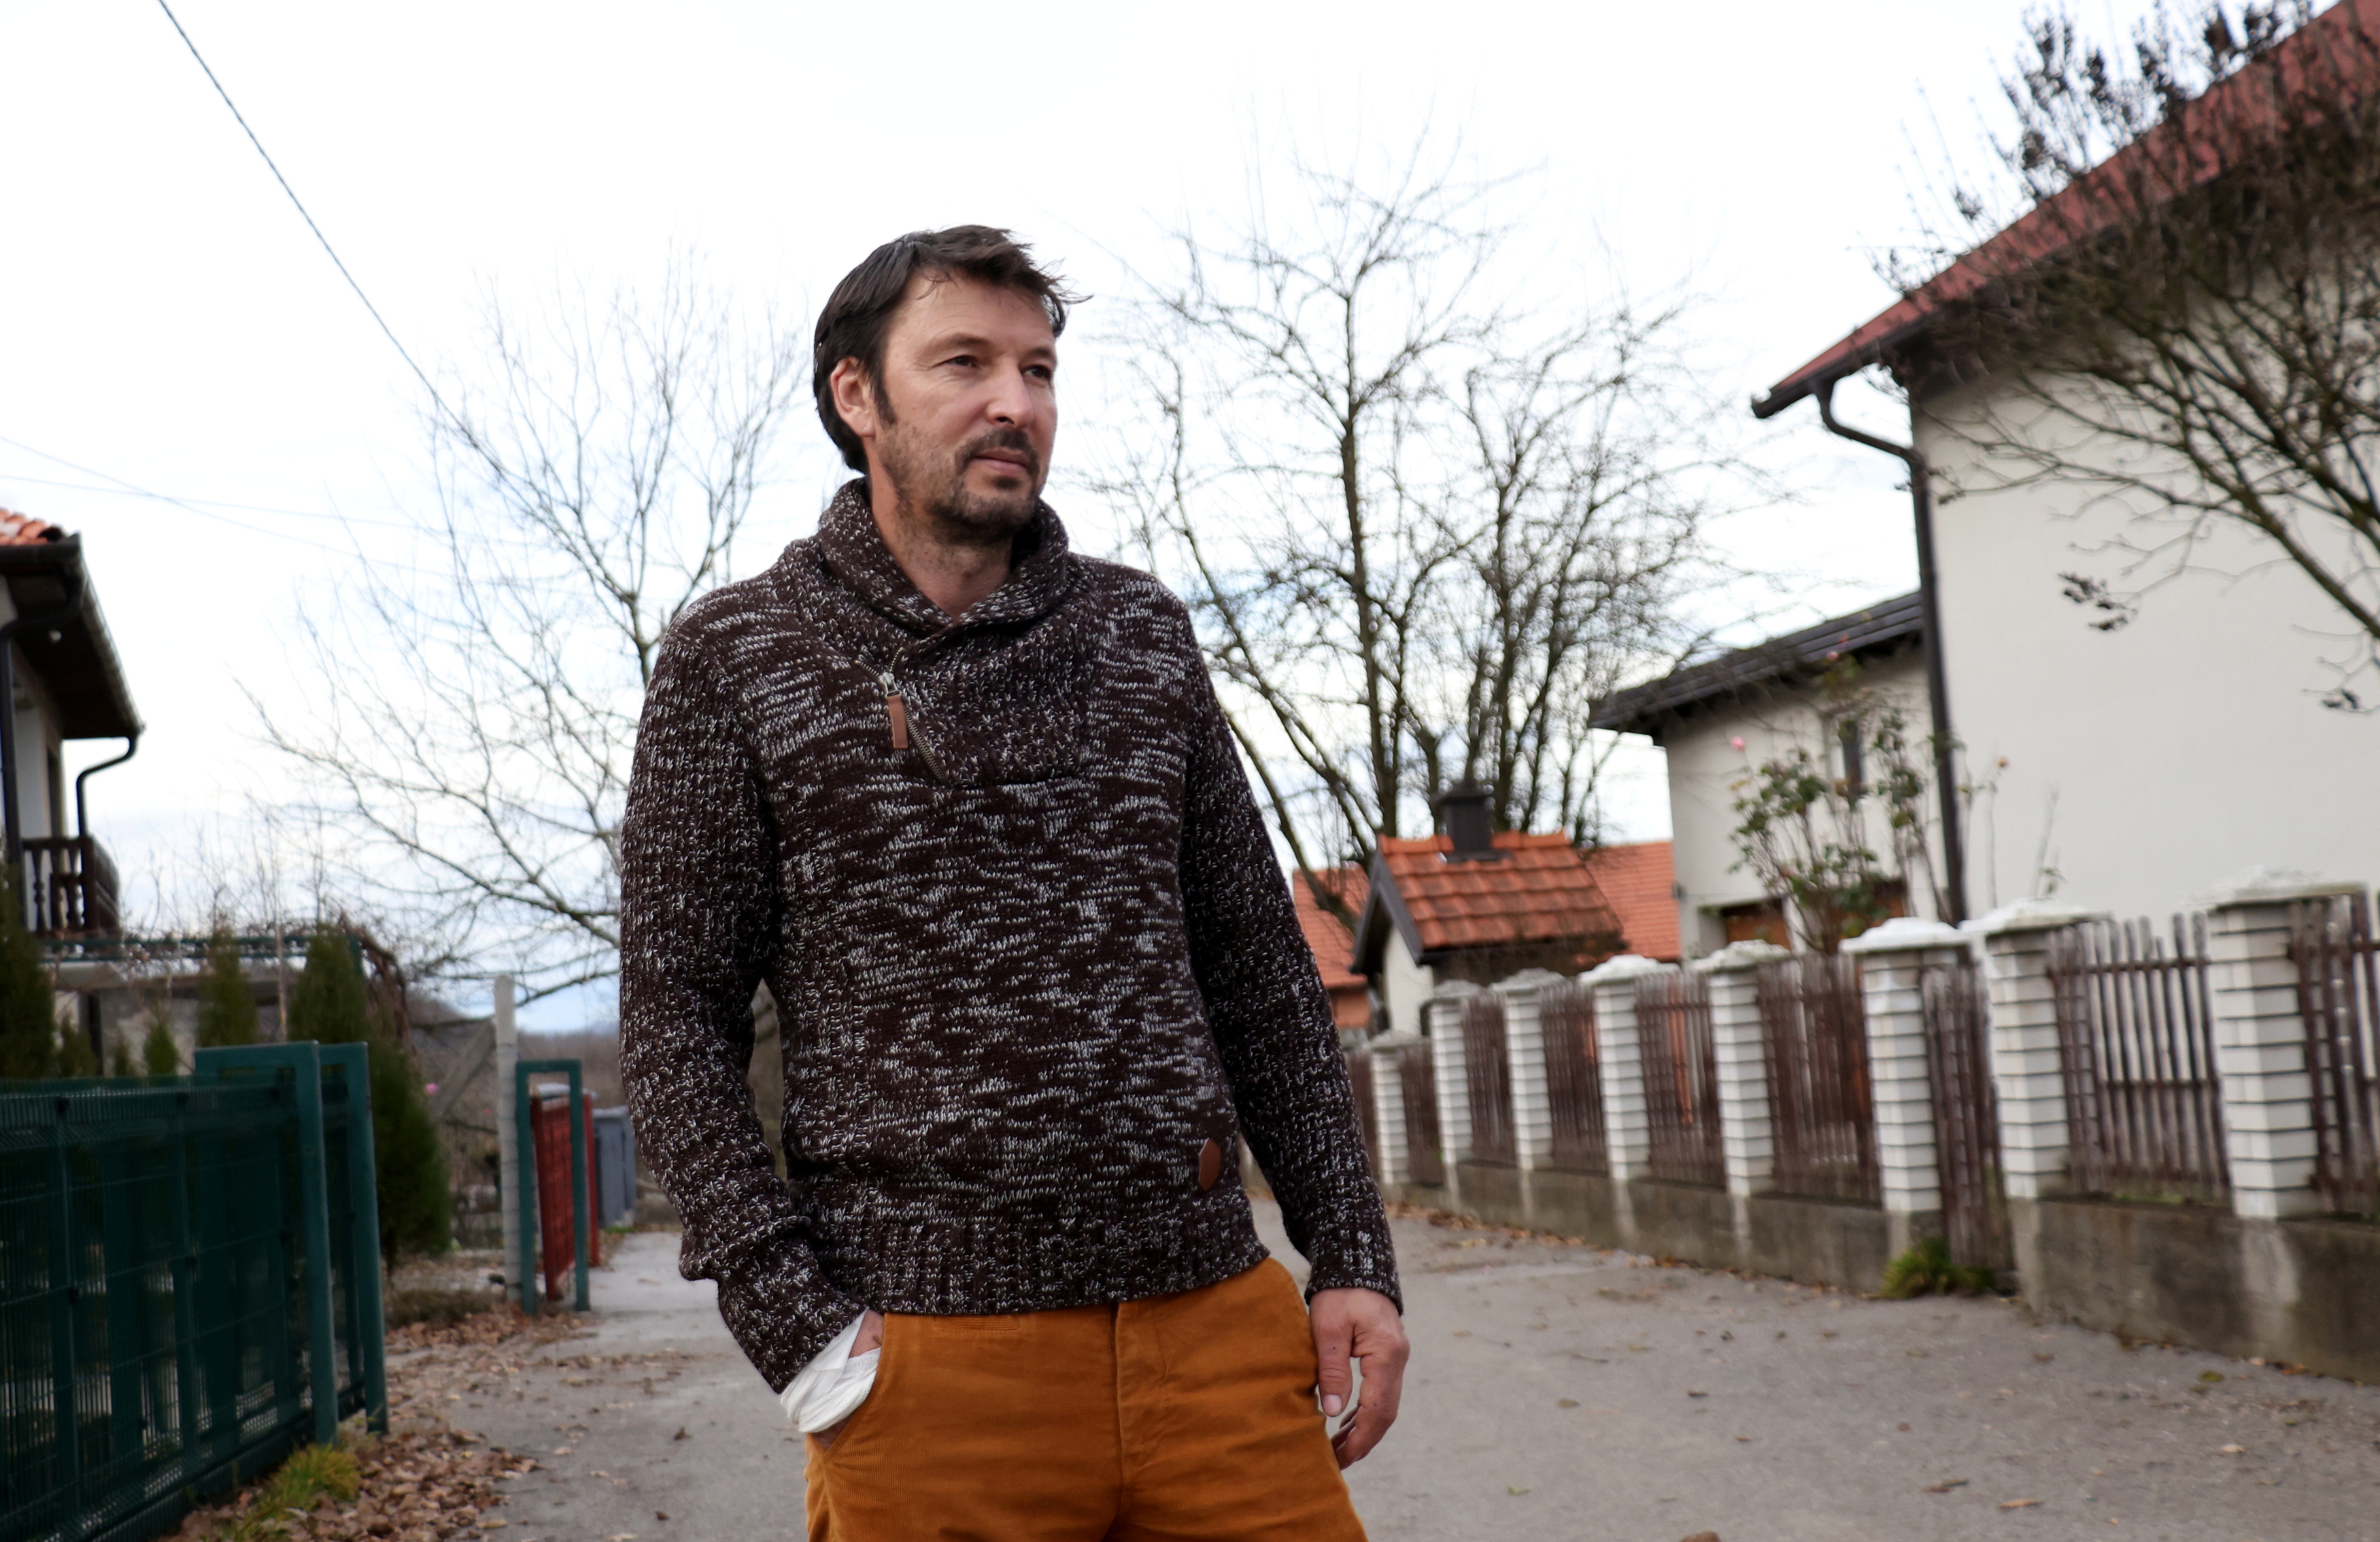 Goran Stojak, the leader of the Bukinje community, speaks during an interview with Reuters in Tuzla